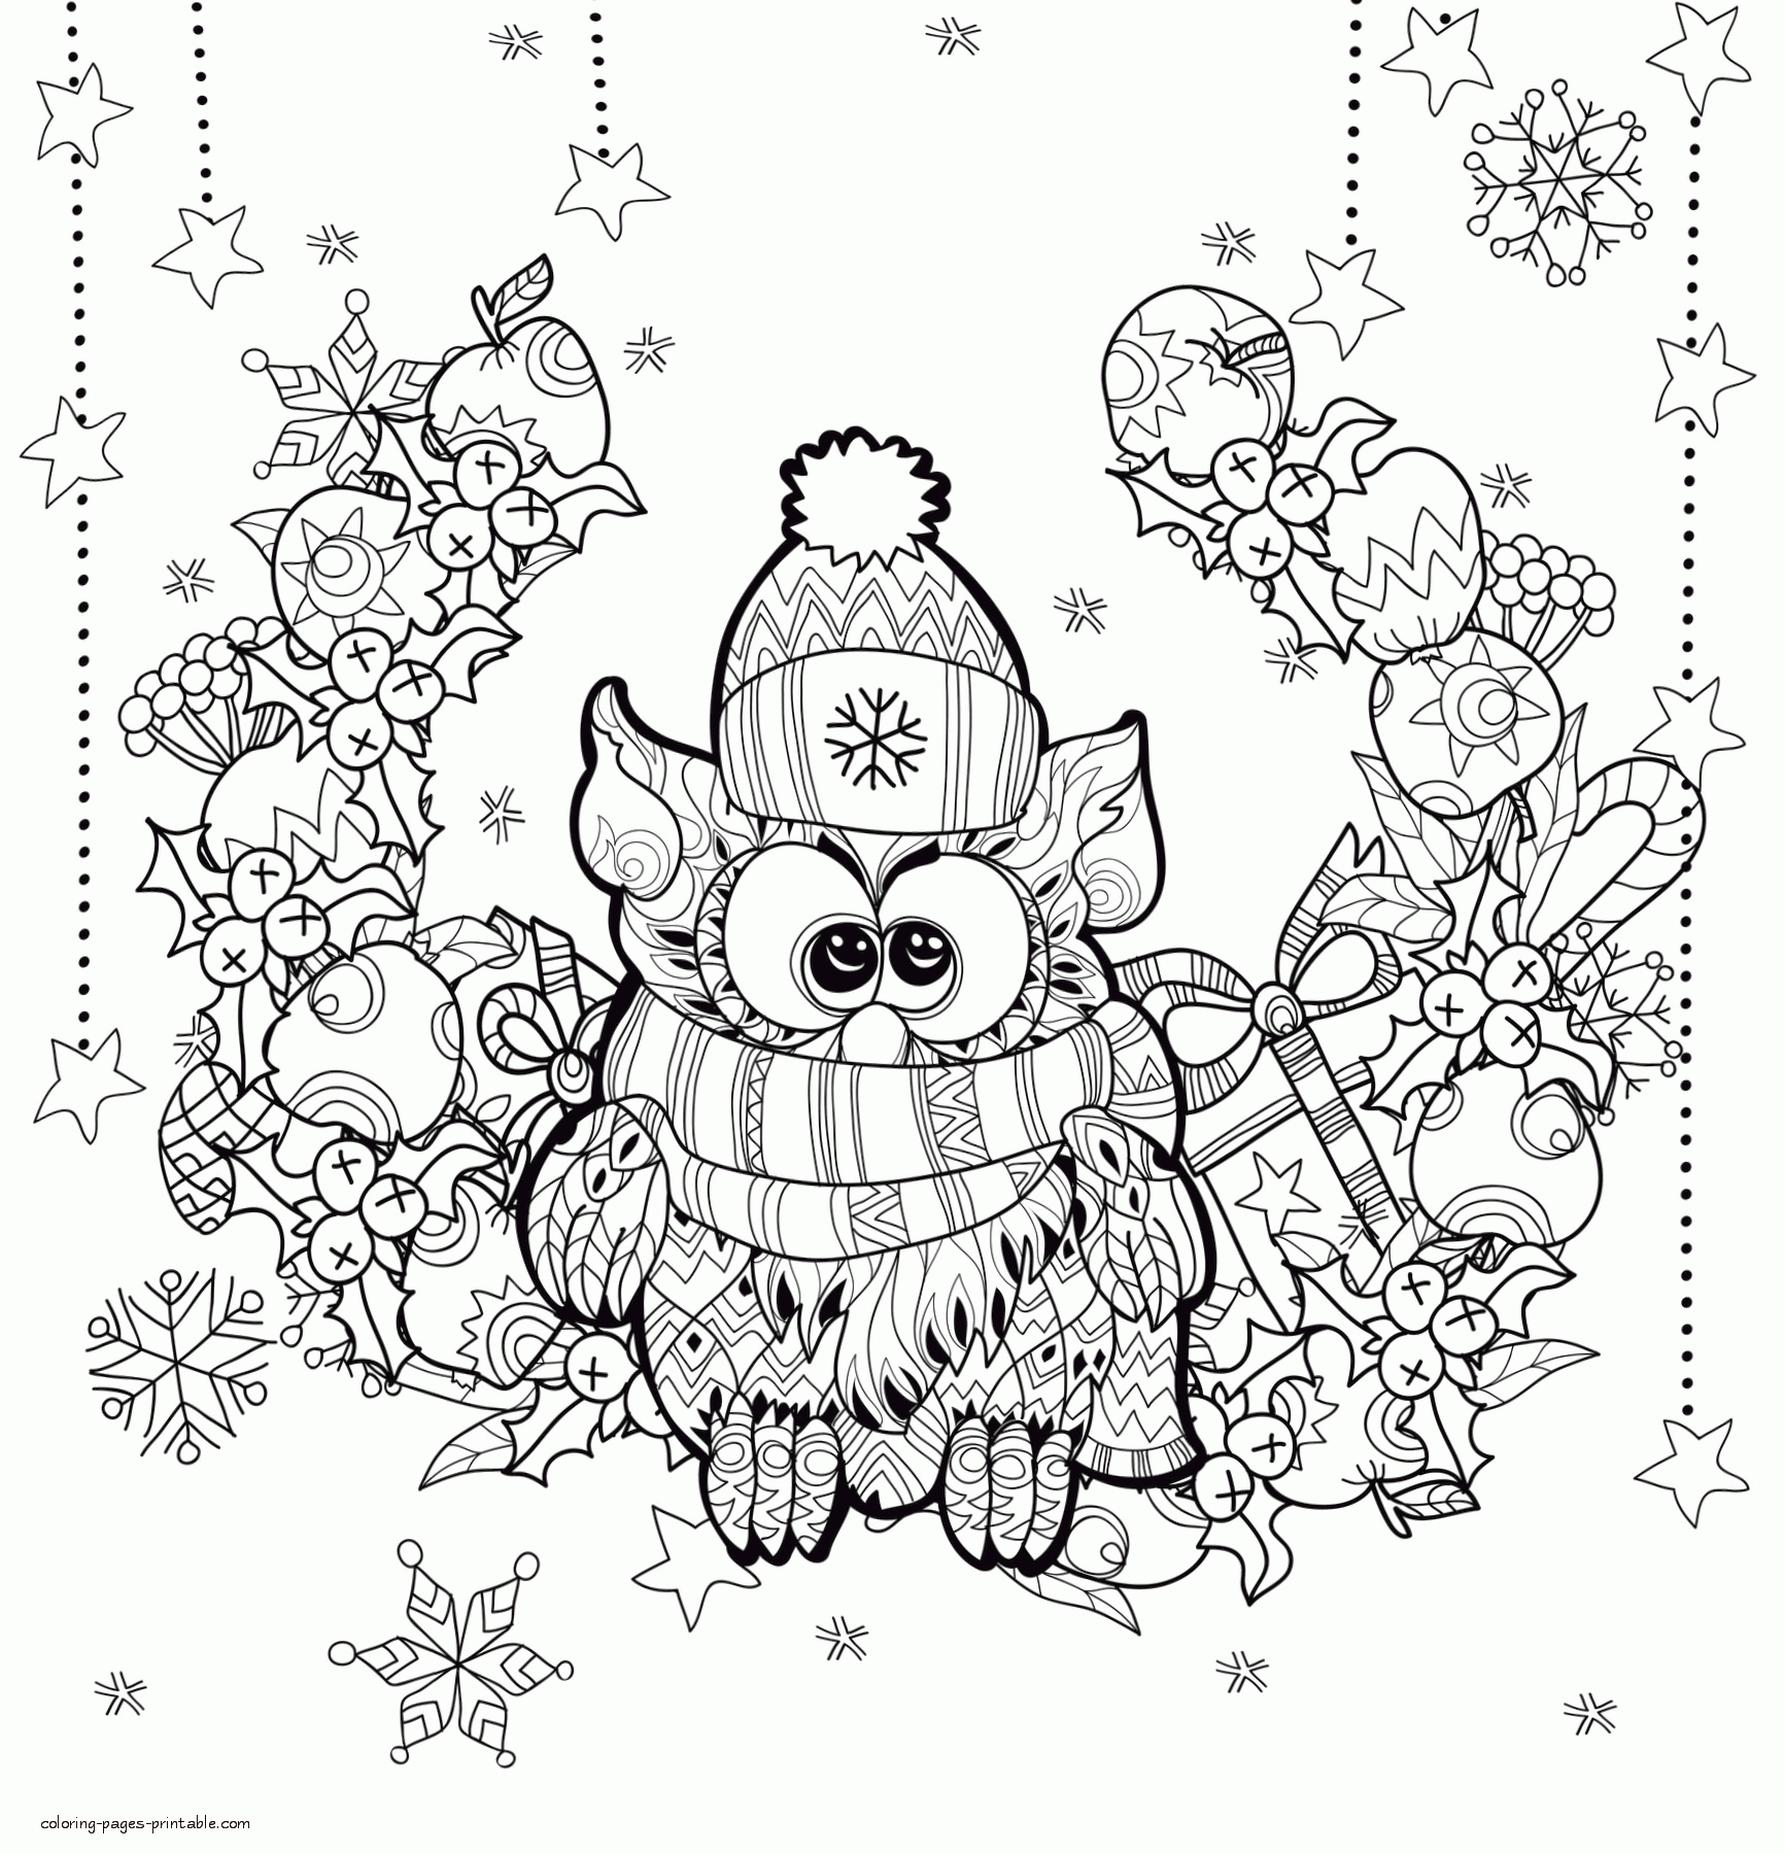 get-this-adult-christmas-coloring-pages-free-to-print-christmas-owl-vdr8